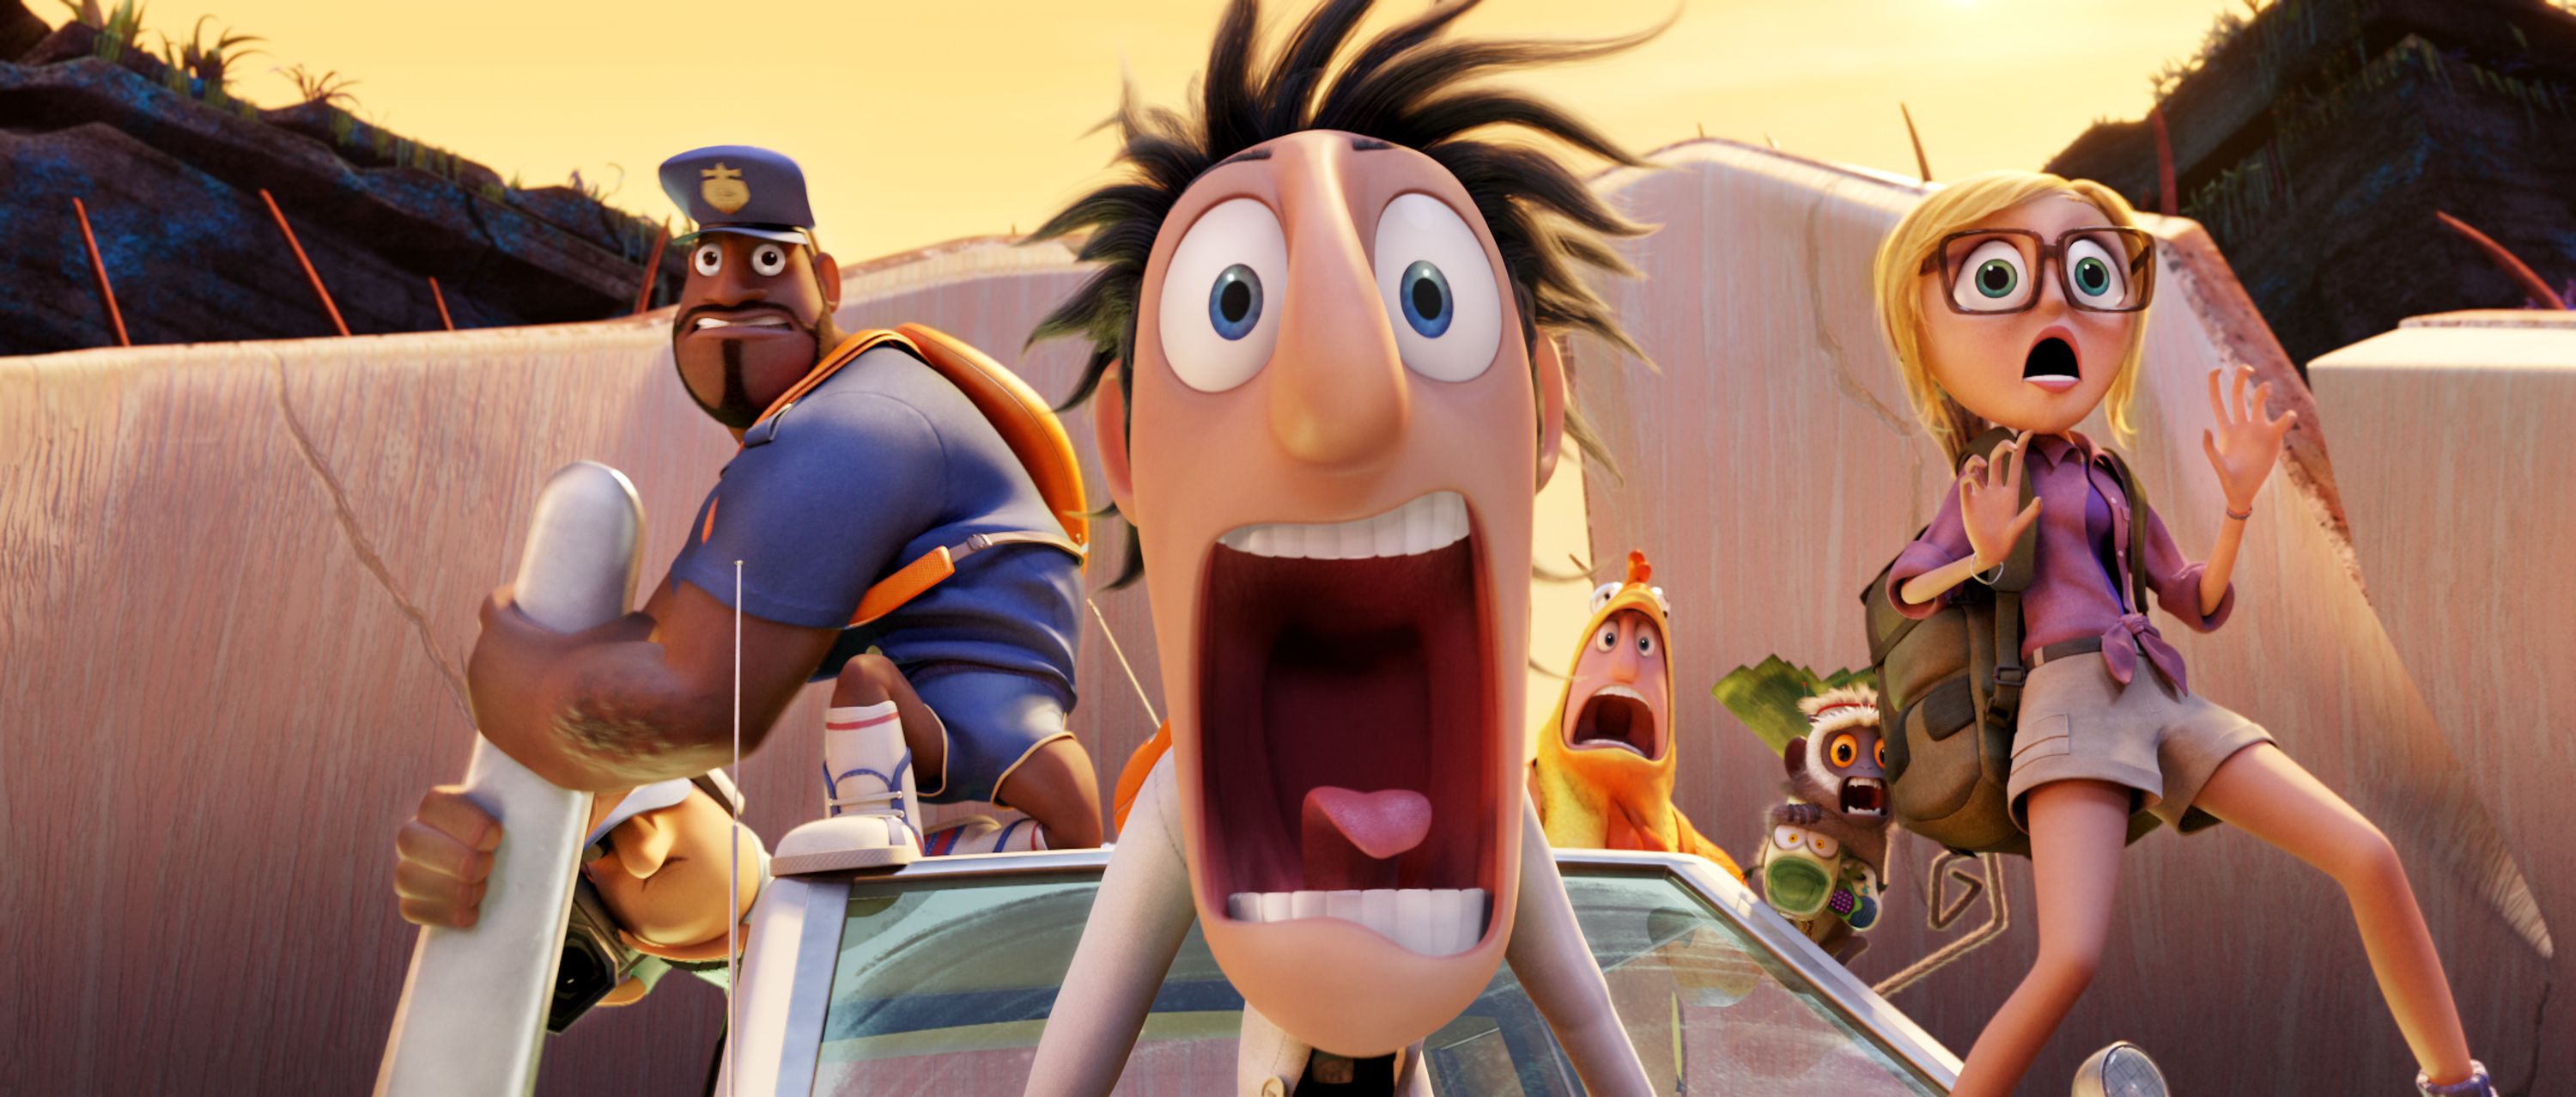 Movie review: Cloudy with a Chance of Meatballs 2 - NZ Herald